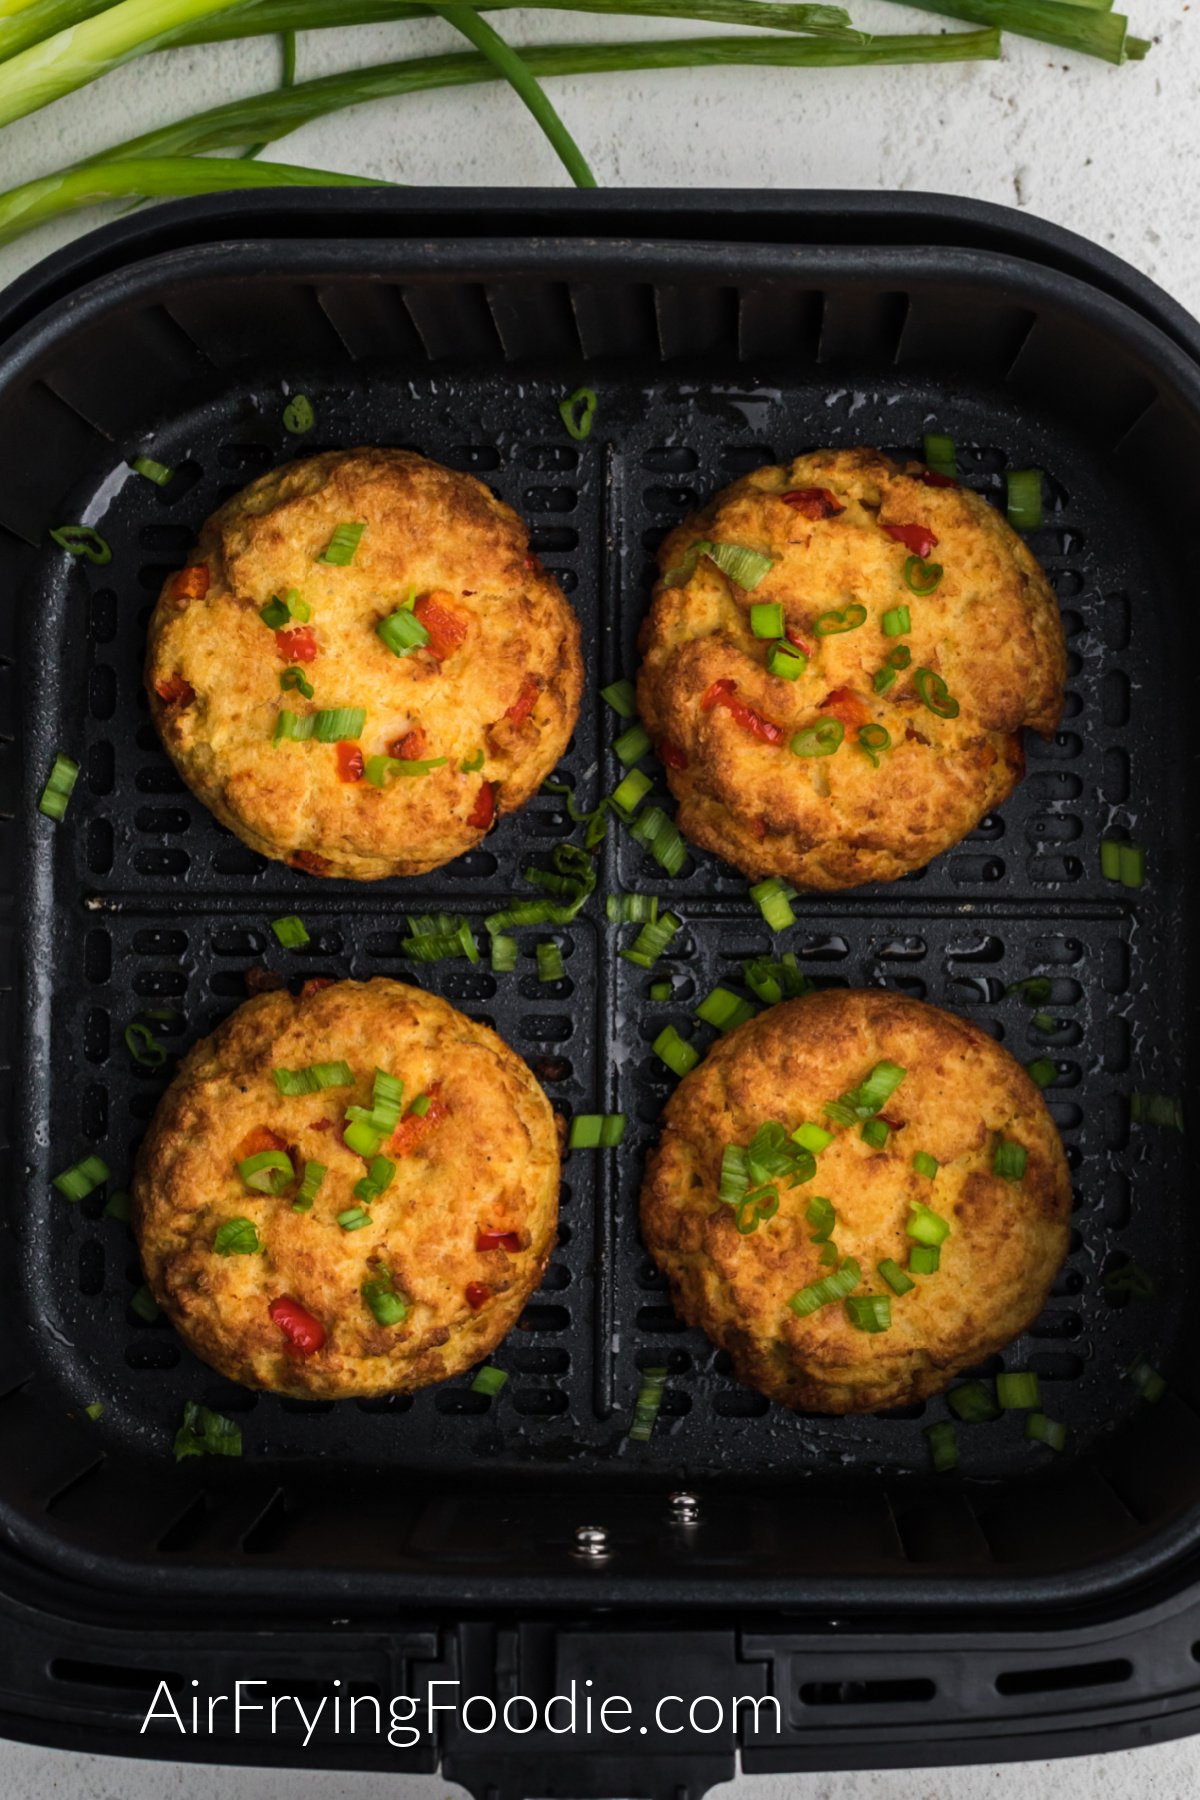 Crab cakes in the air fryer basket fully cooked and ready to serve.